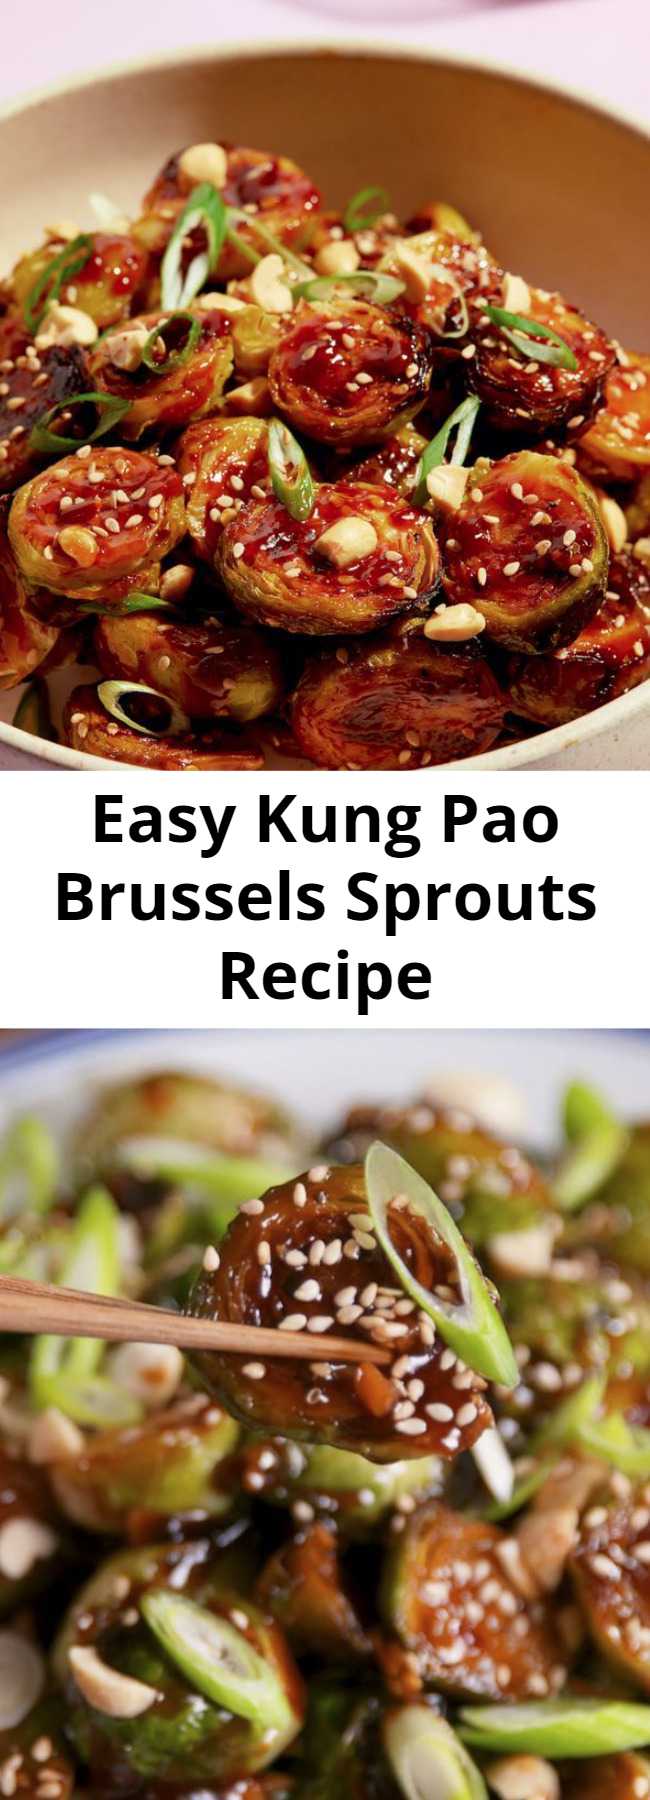 Easy Kung Pao Brussels Sprouts Recipe - The kung pao sauce on these will turn everyone into a lover of Brussels sprouts. Salty, spicy, and addicting. #food #easyrecipe #healthyeating #cleaneating #vegetarian